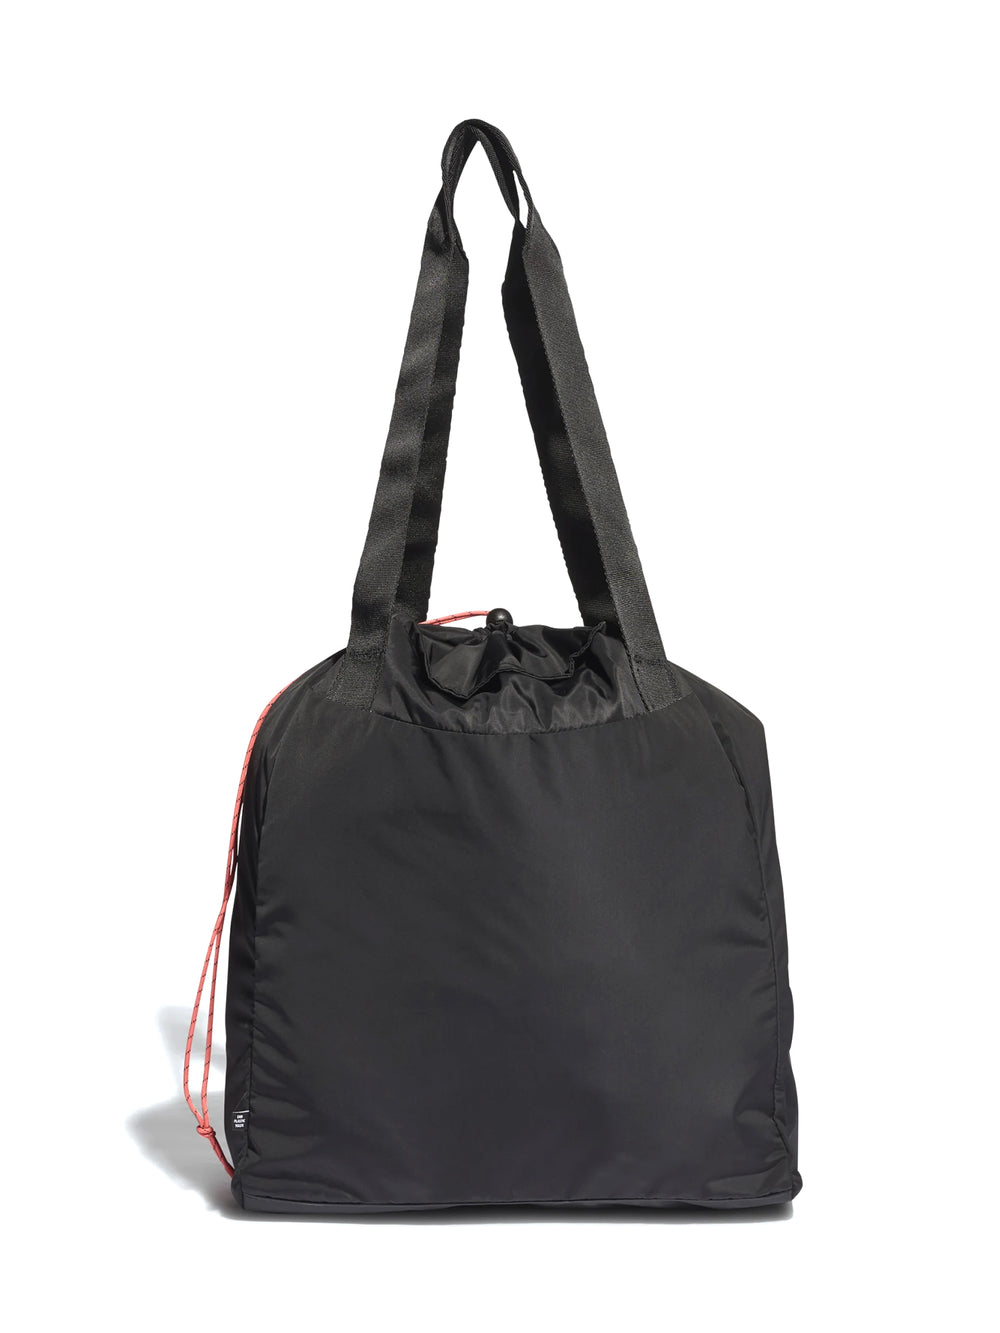 ADIDAS ST TOTE BAG - BLACK - CLEARANCE